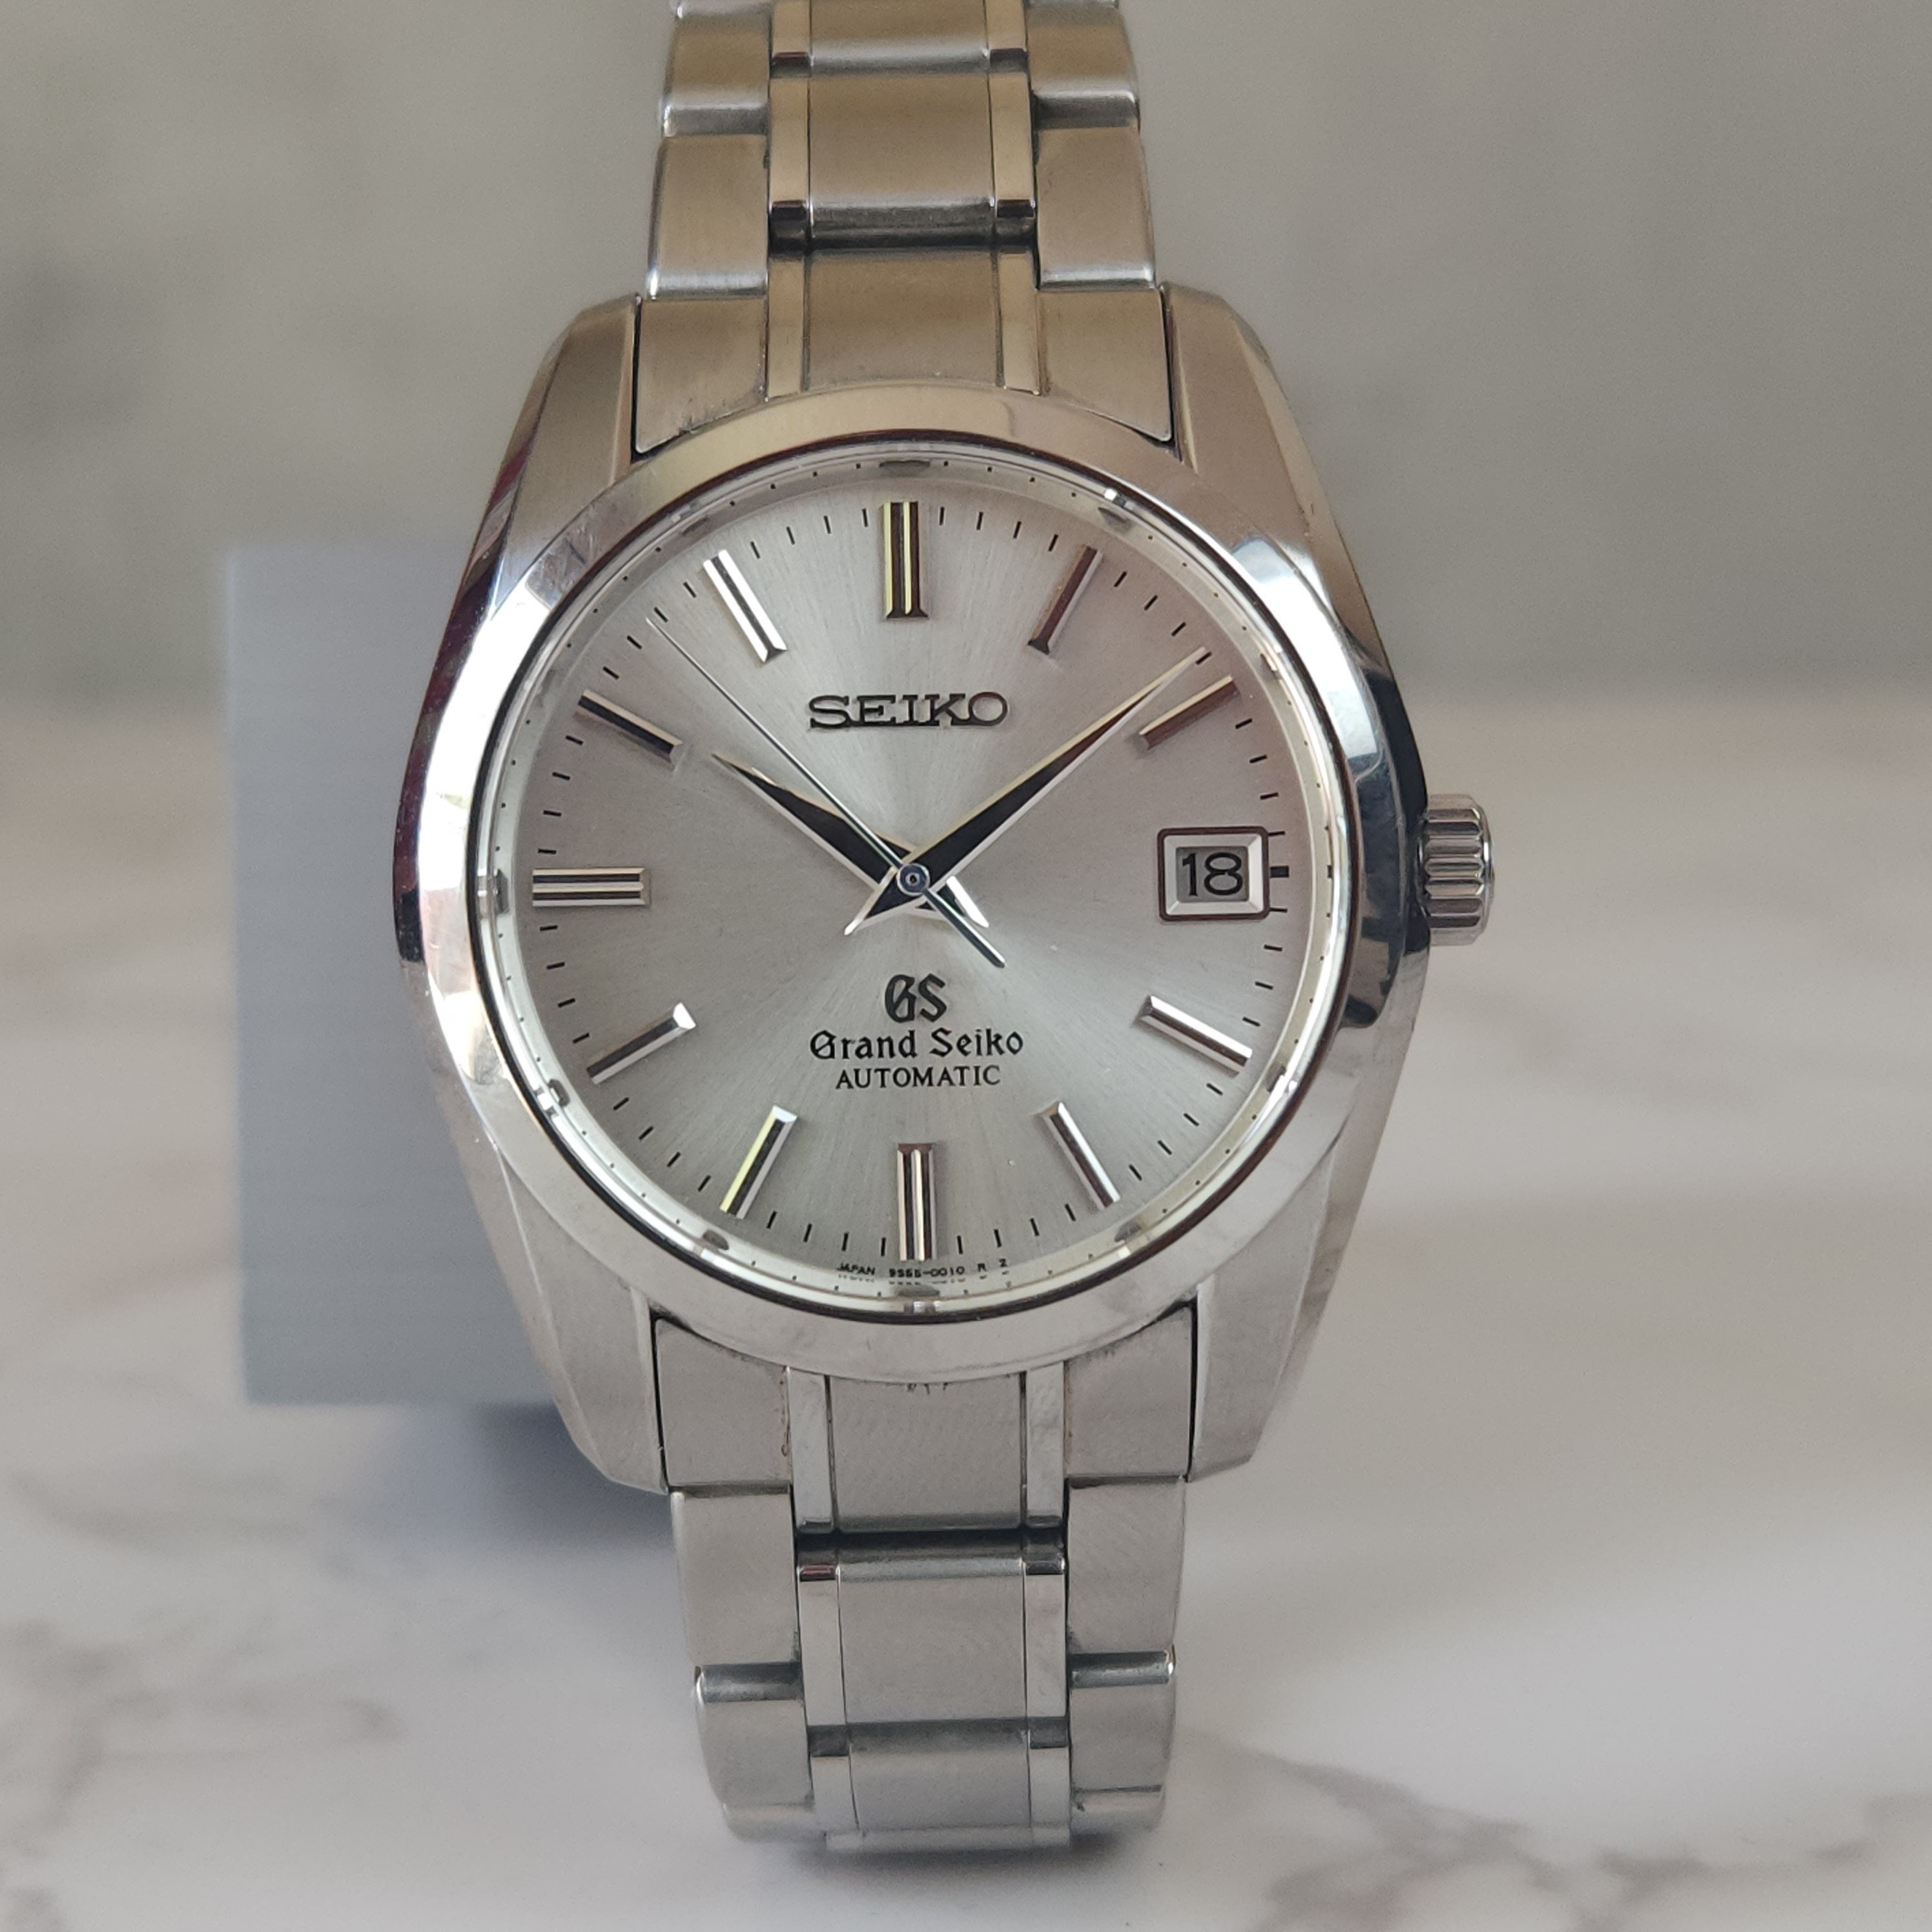 Grand Seiko 36mm Silver Dial Steel Men’s Automatic Watch SBGR001/9S55 ...